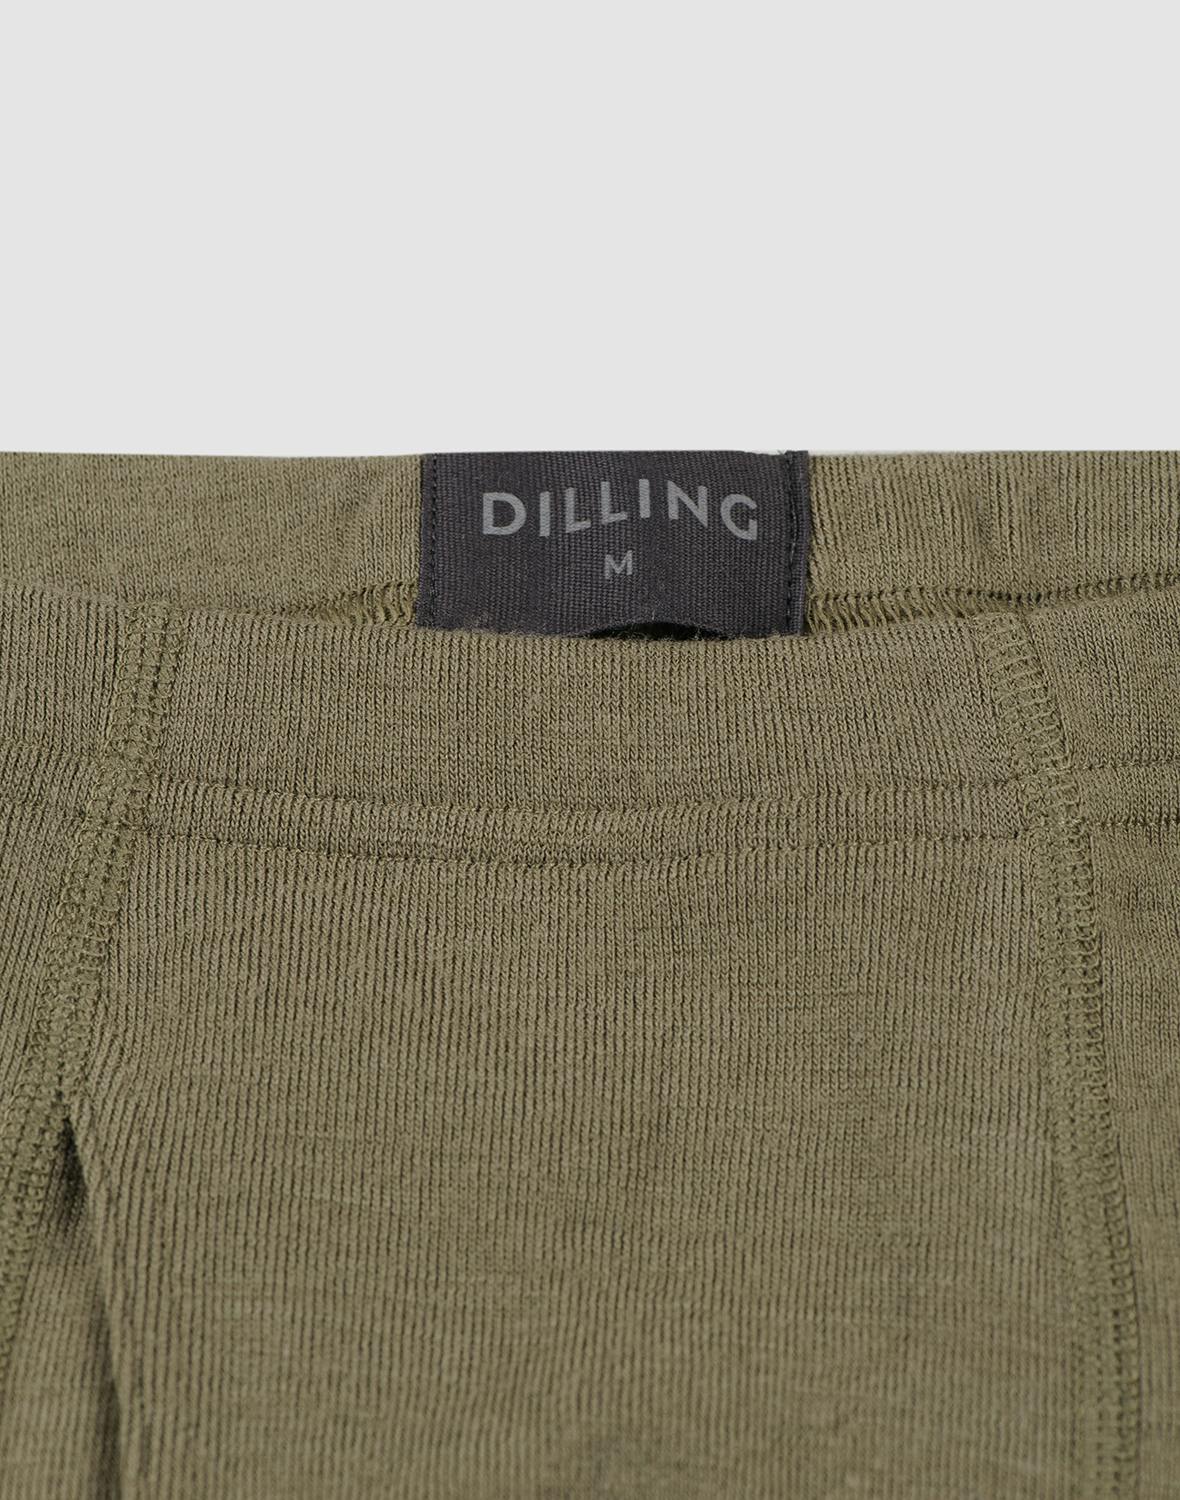 Men's merino wool long johns with fly - Silver sage - Dilling